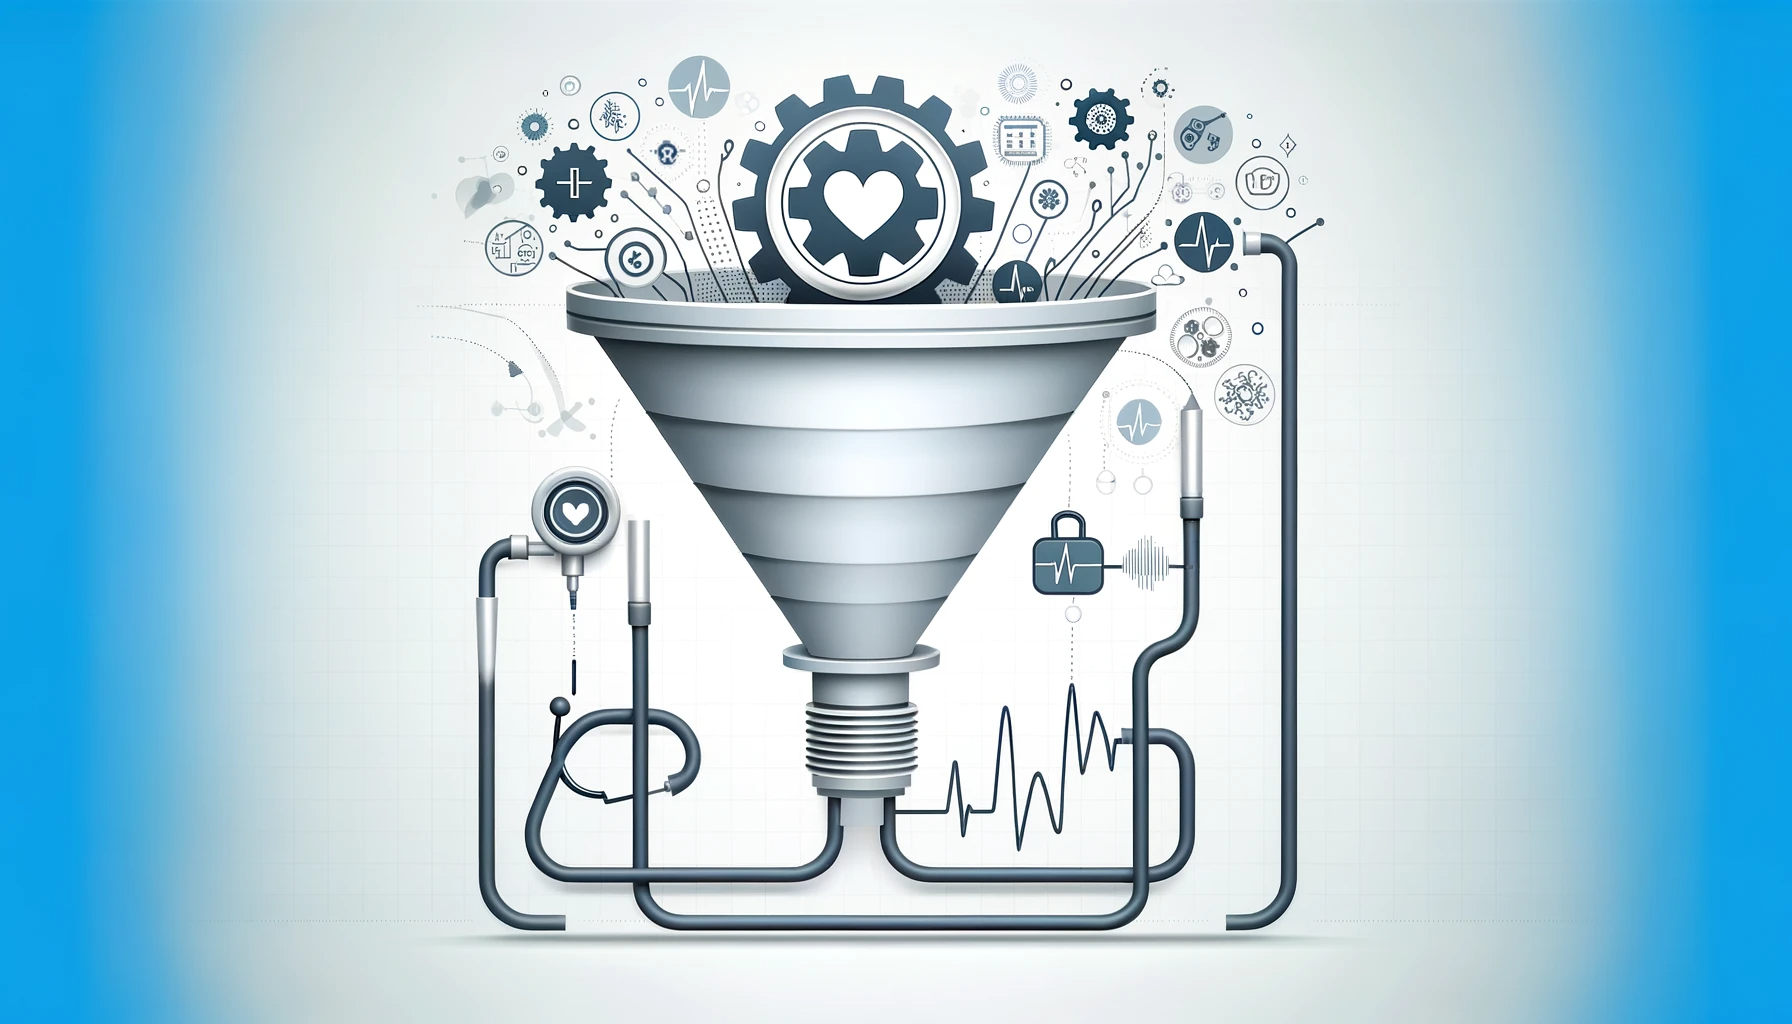 Leveraging Digital Tools for an Effective Funnel: Integrating Technology with Care